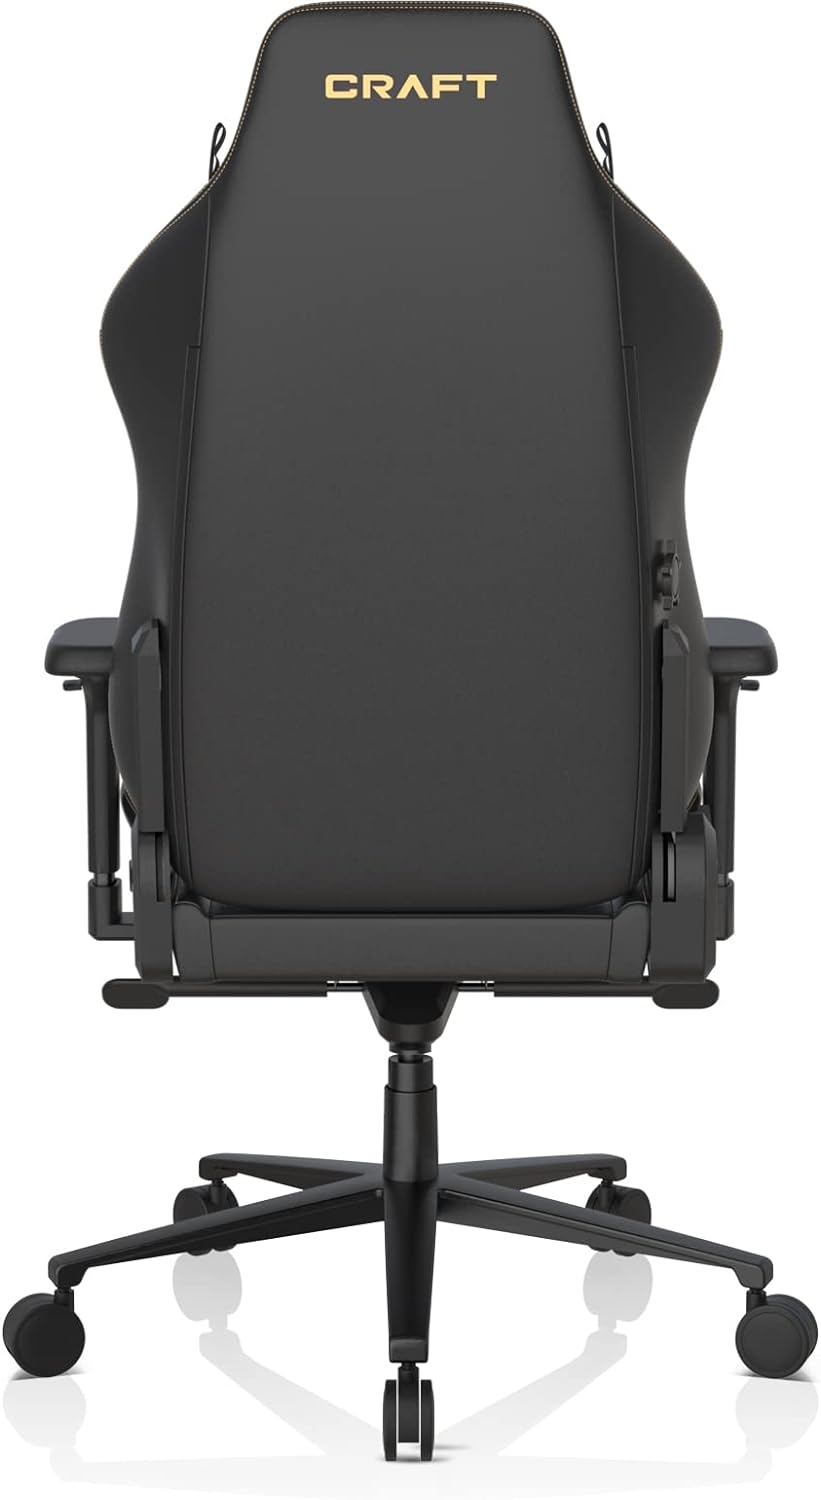 Stylish Craft Gaming Chair with integrated lumbar support for exceptional spinal alignment. 0810027590732